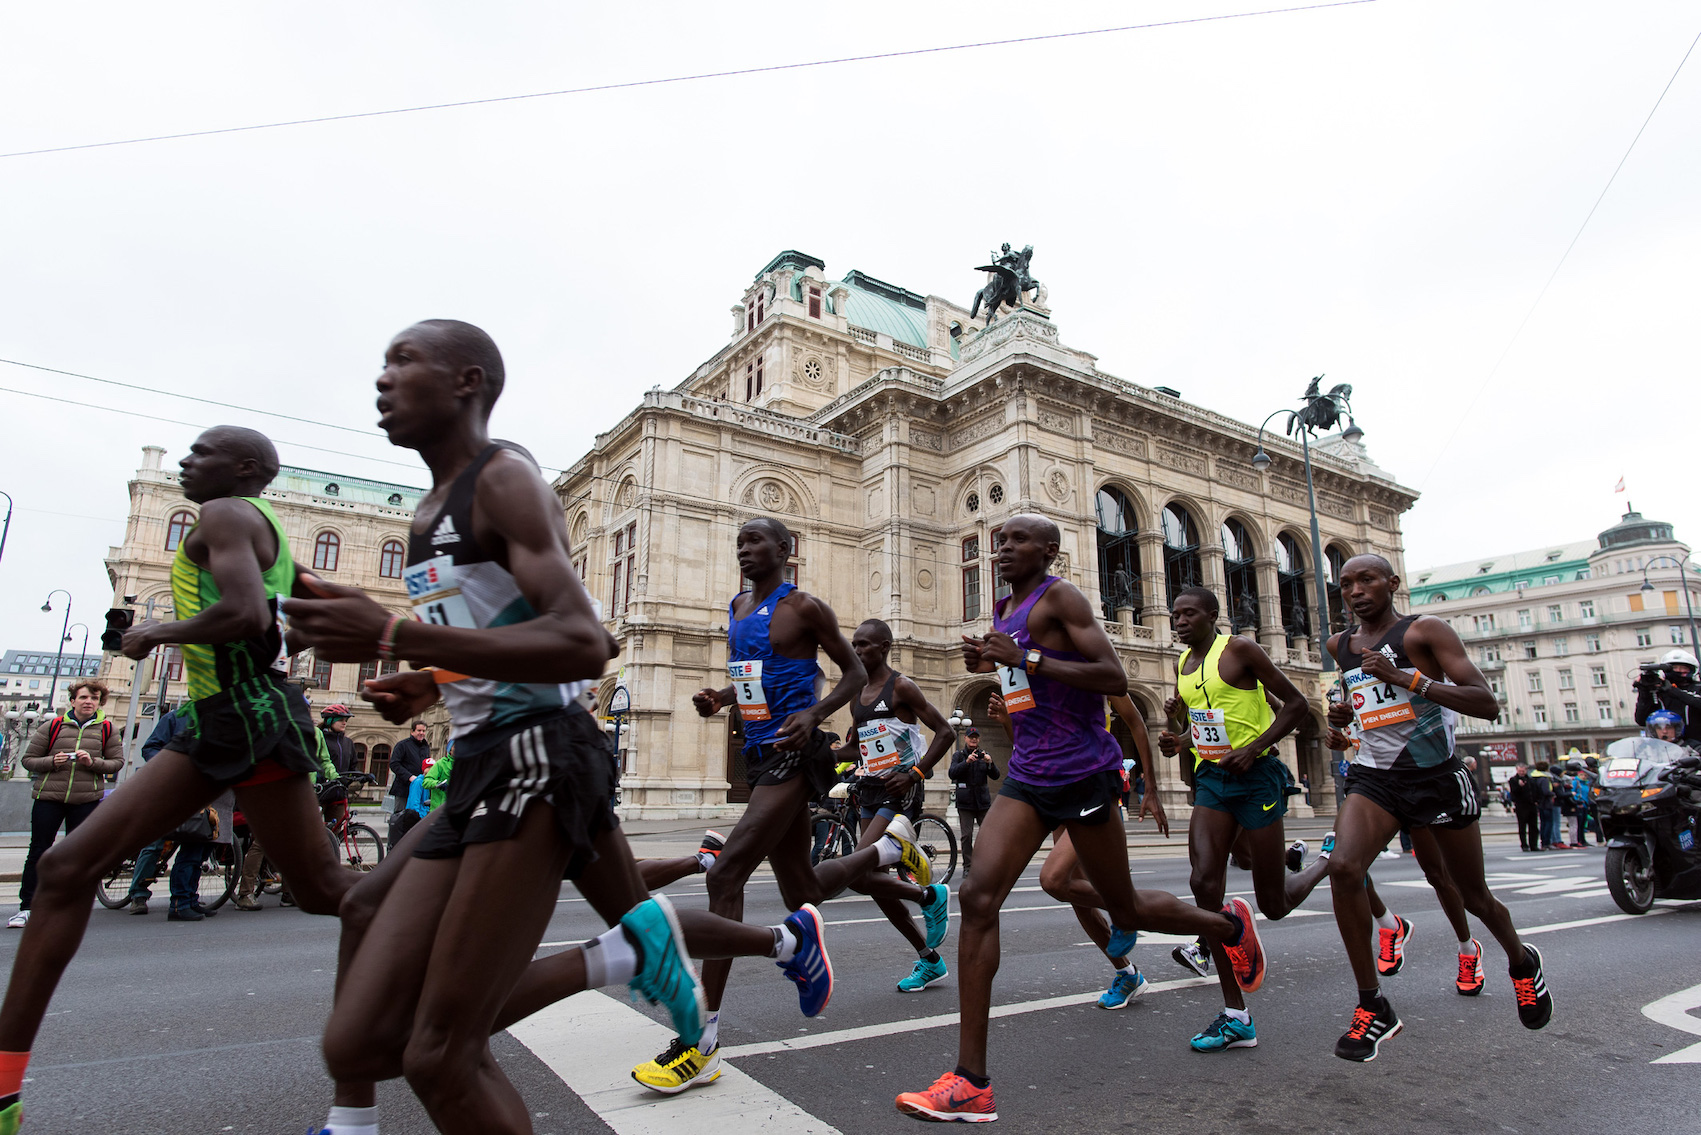 Leading group of runners at the 2021 Vienna City Marathon passing the Opera House / Credit: VCM / Michael Gruber